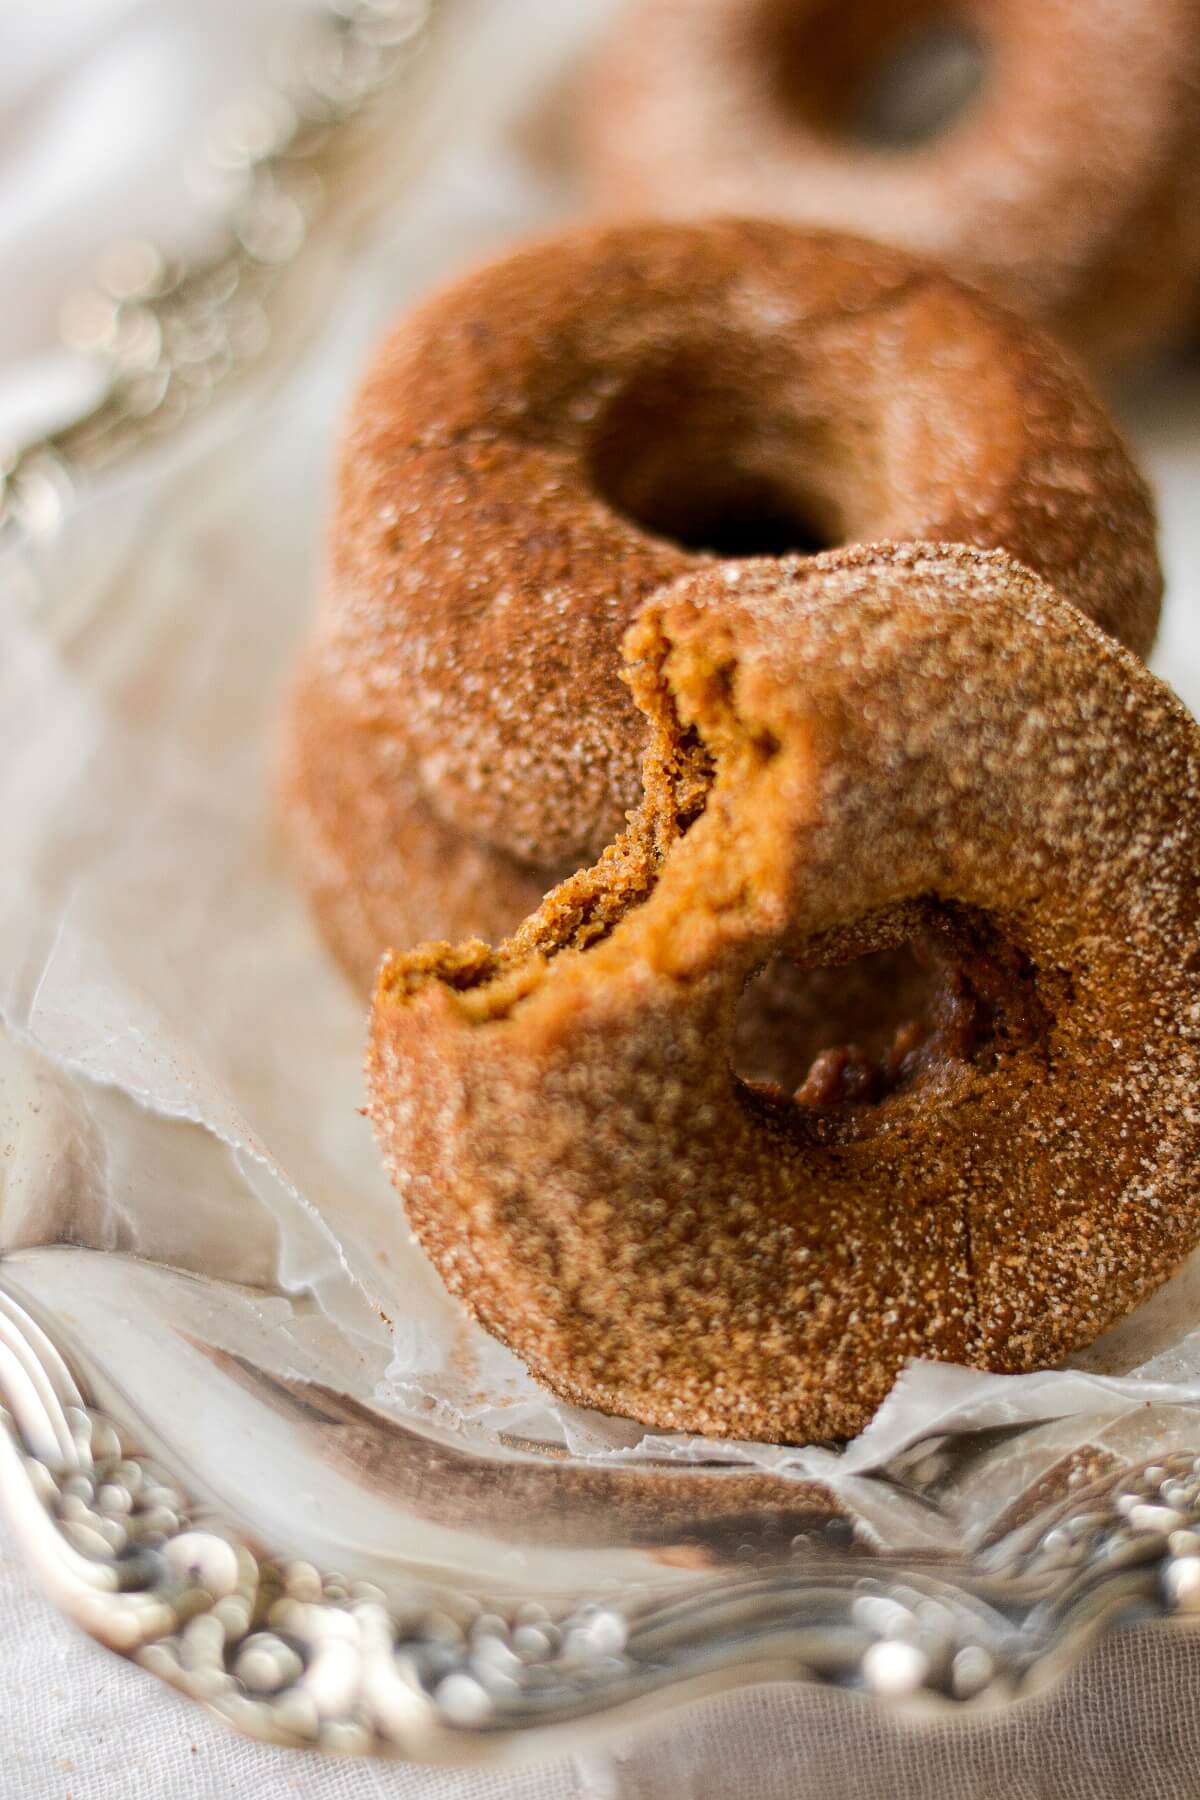 Closeup of baked pumpkin spice donuts, coated in cinnamon sugar, one with a bite taken out of it.